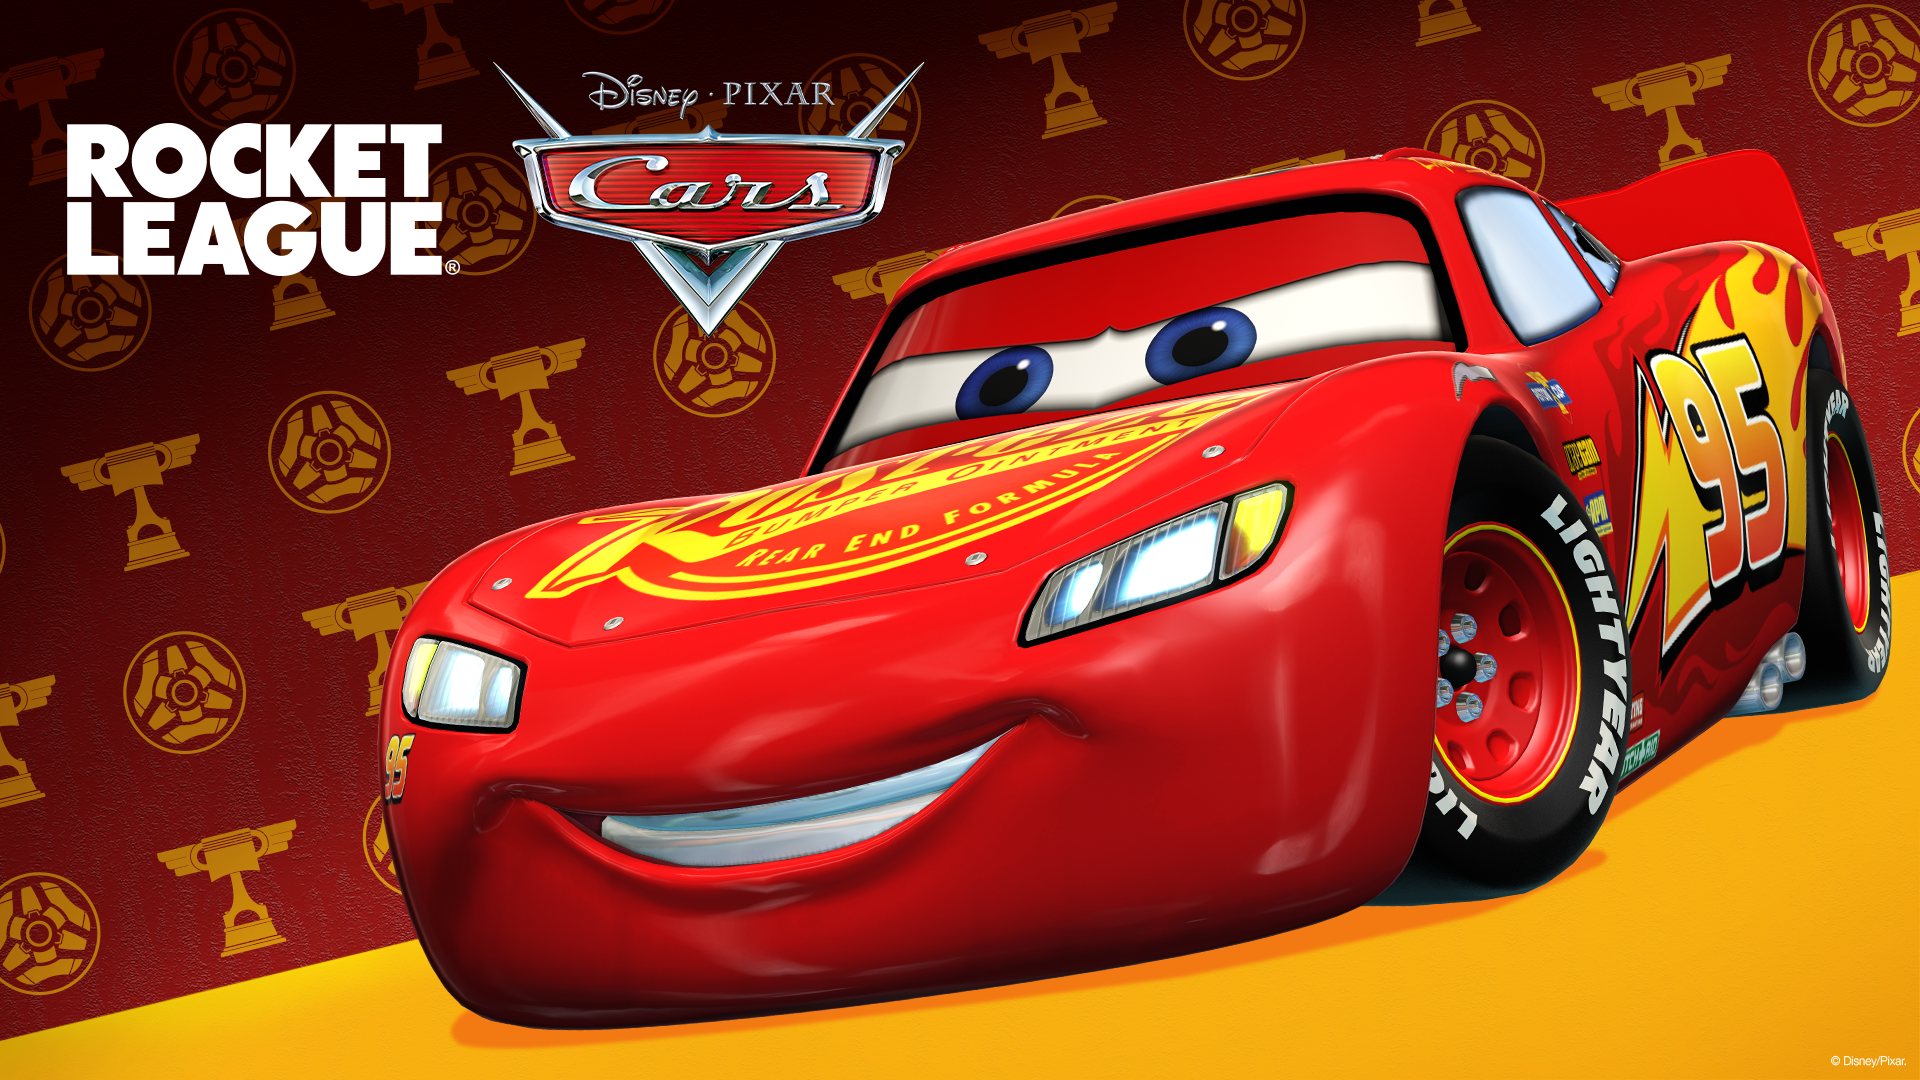 Behind The Thrills  New video boasts more about Lightning McQueen